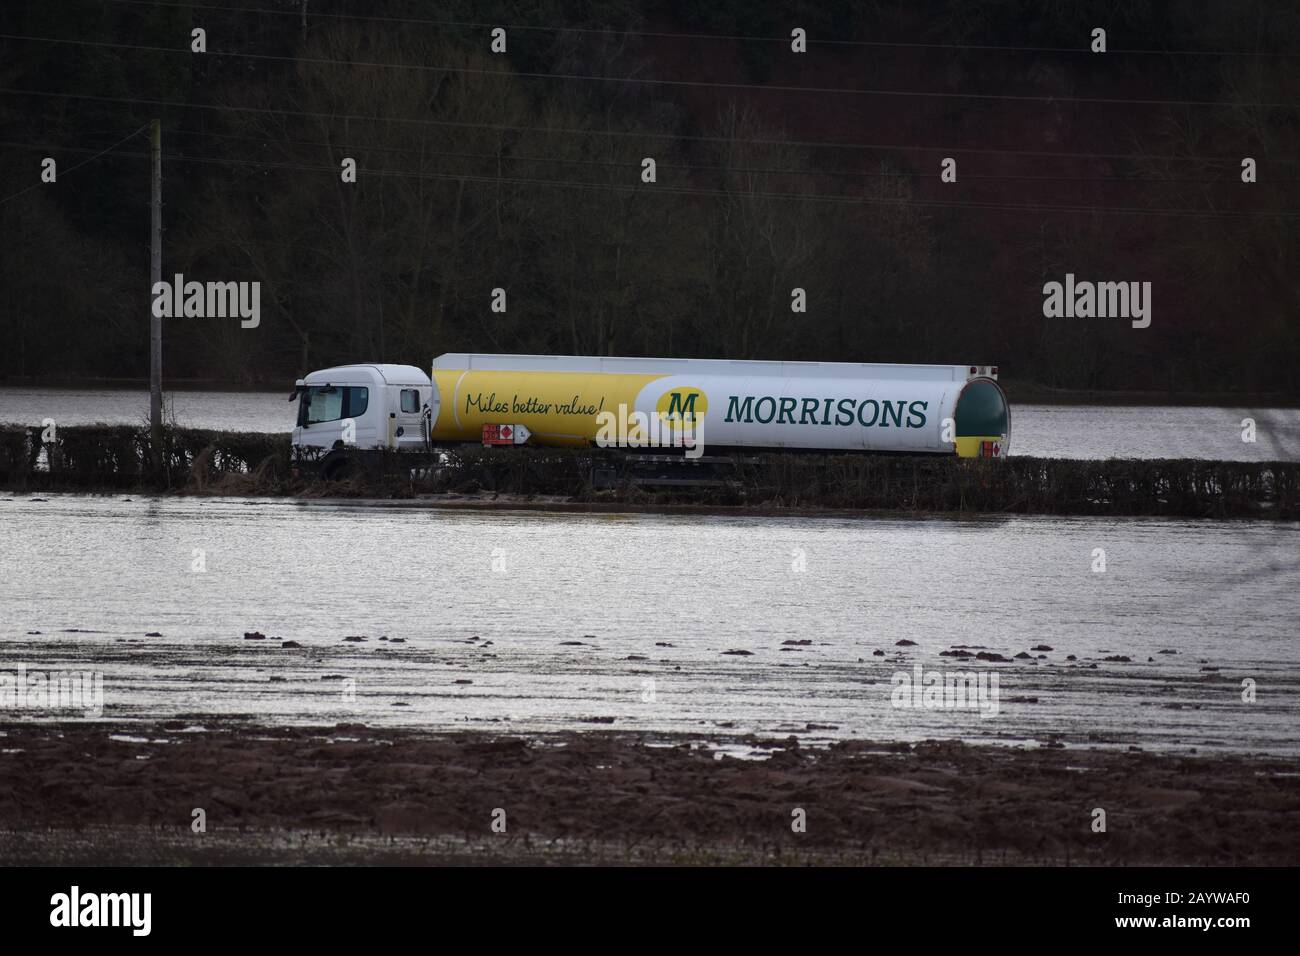 An abandoned fuel tanker stranded in floodwater caused by Storm Dennis on a road running alongside the River Teme near near Tenbury Wells, Worcestershire. Local people said the tanker had been stuck near Eastham since Saturday. Stock Photo